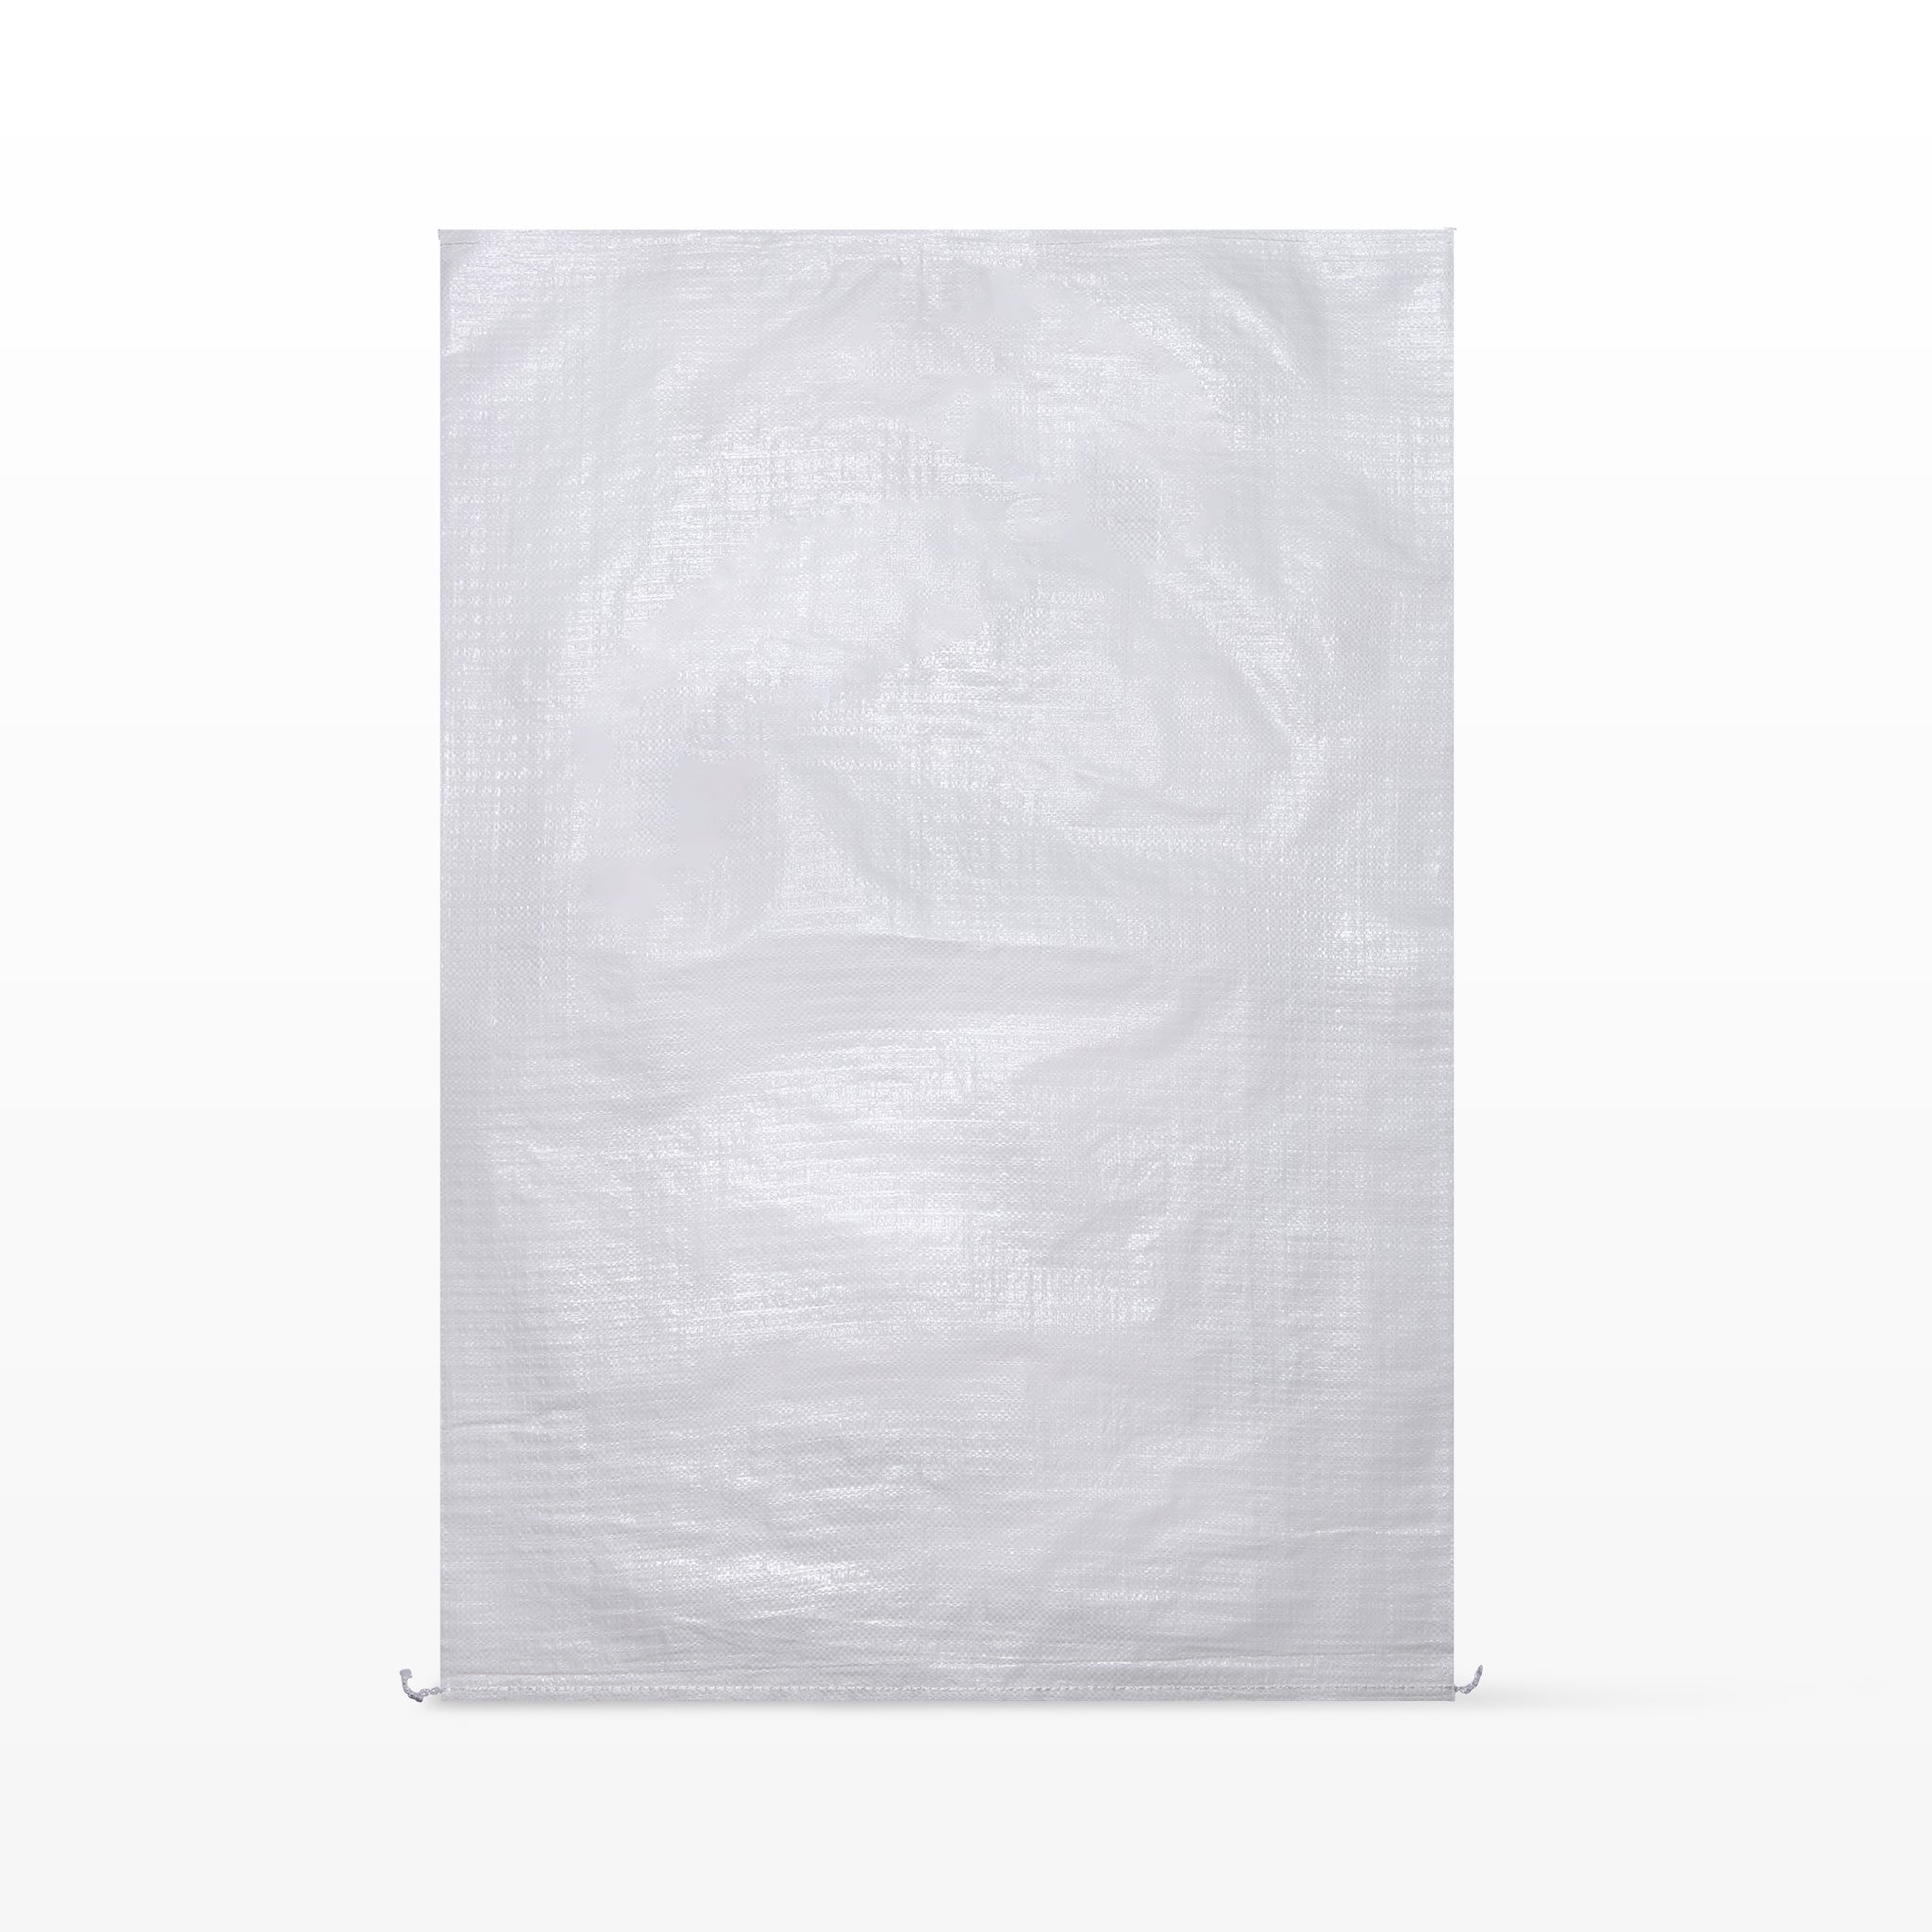 LK Packaging NW128138 Non Woven Poly Shopping/Grocery Bag - 12 1/2